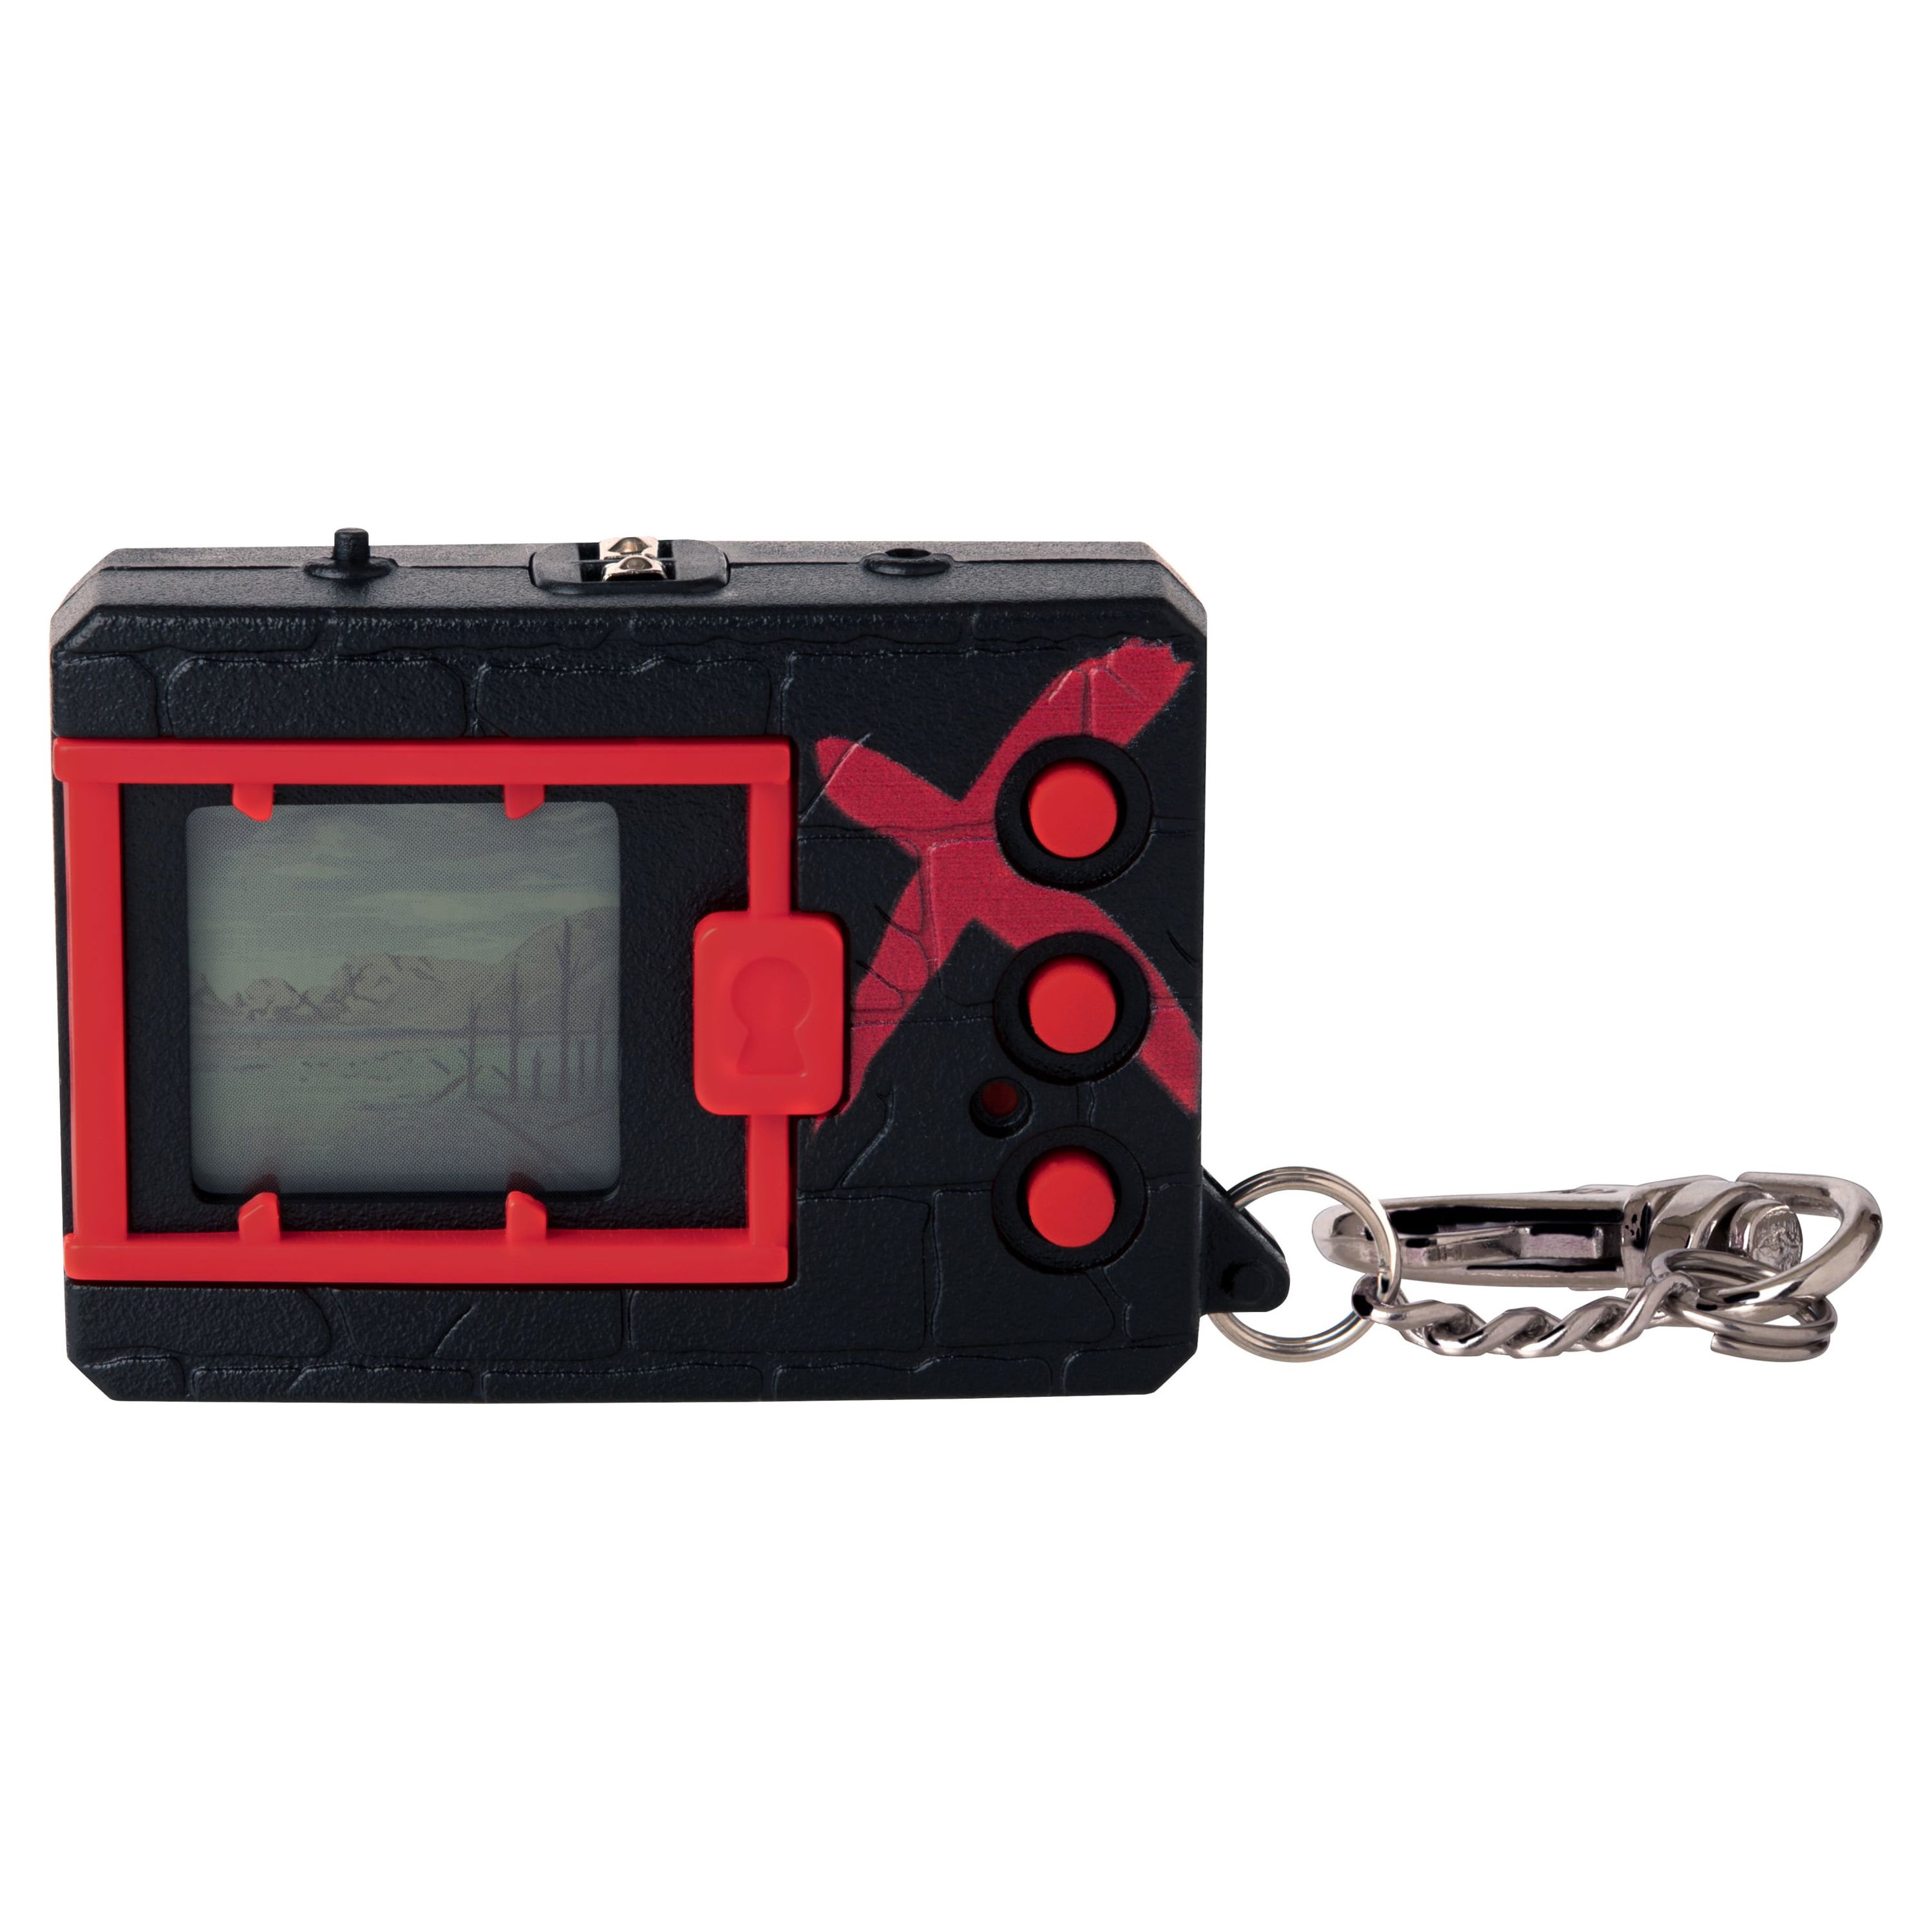 Digimon X Electronic Monster Toy ( Black & Red) - image 1 of 5